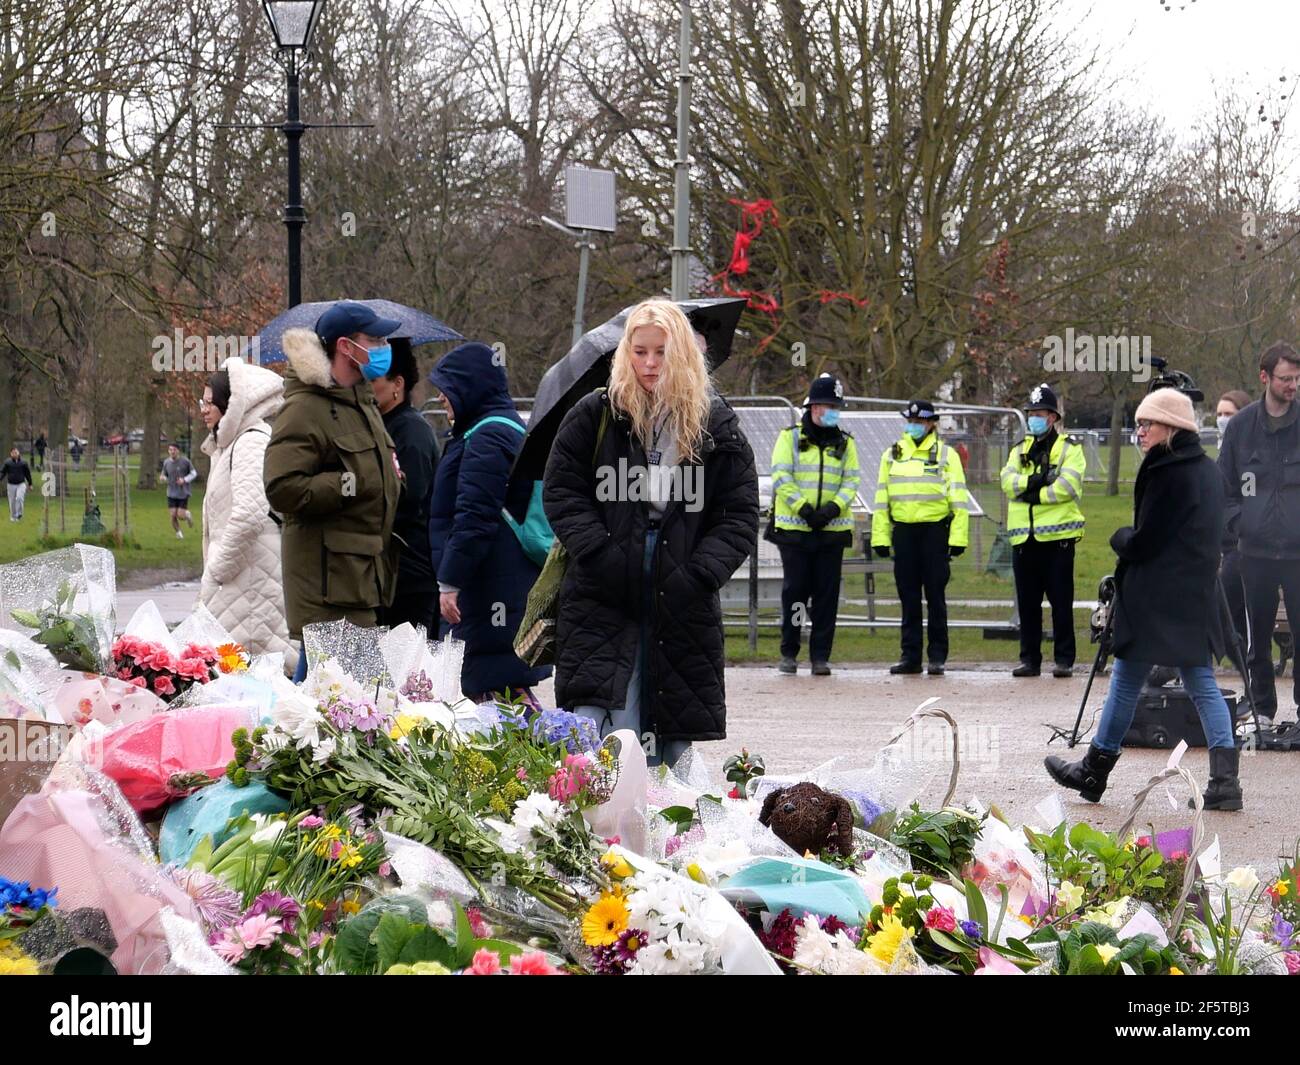 At around 21:00 GMT on 3 March 2021, Everard left the house of a friend near Clapham Junction to the west of Clapham Common.[4][7][8] She walked across the common, along the A205 South Circular Road, en route to her home.[7][3][9] She spoke to her boyfriend on her mobile phone for about fifteen minutes and agreed to meet him the next day.[3] At 21:28, she was seen on doorbell camera footage on Poynders Road[10] and four minutes later on the dashcam of a passing police car.[11][4][3] CCTV footage from a bus passing her route at 21:35 also assisted the investigation. Stock Photo